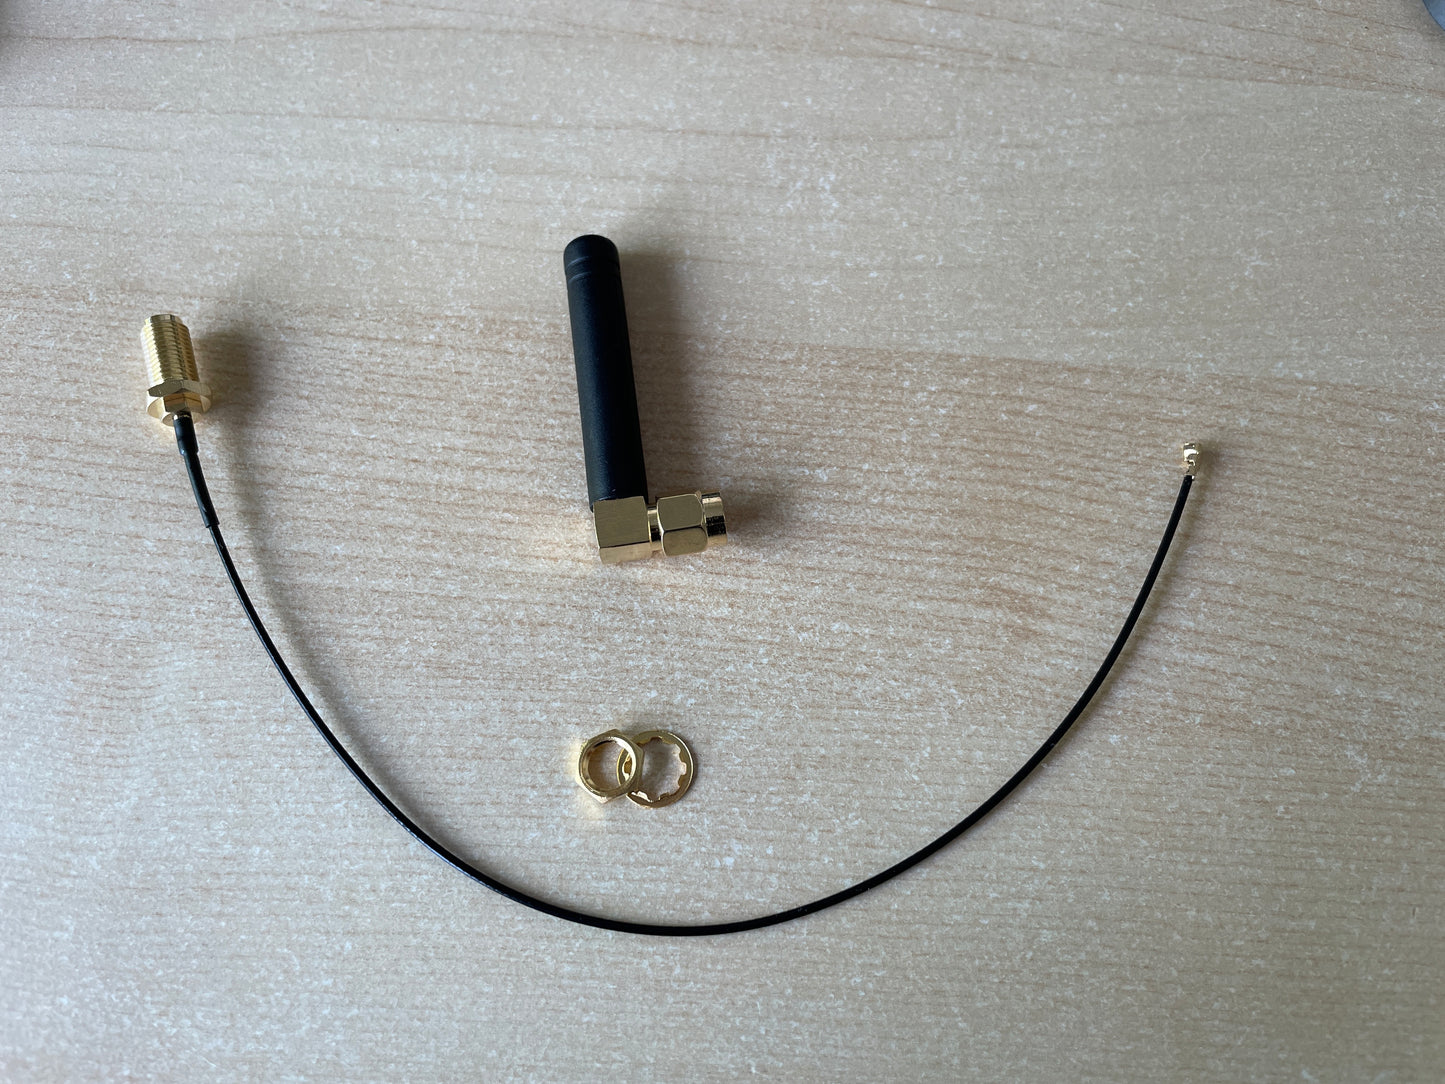 915Mhz 3dbi antenna (48mm 90-deg) - SMA Male with u.fl to SMA Female pigtail extension